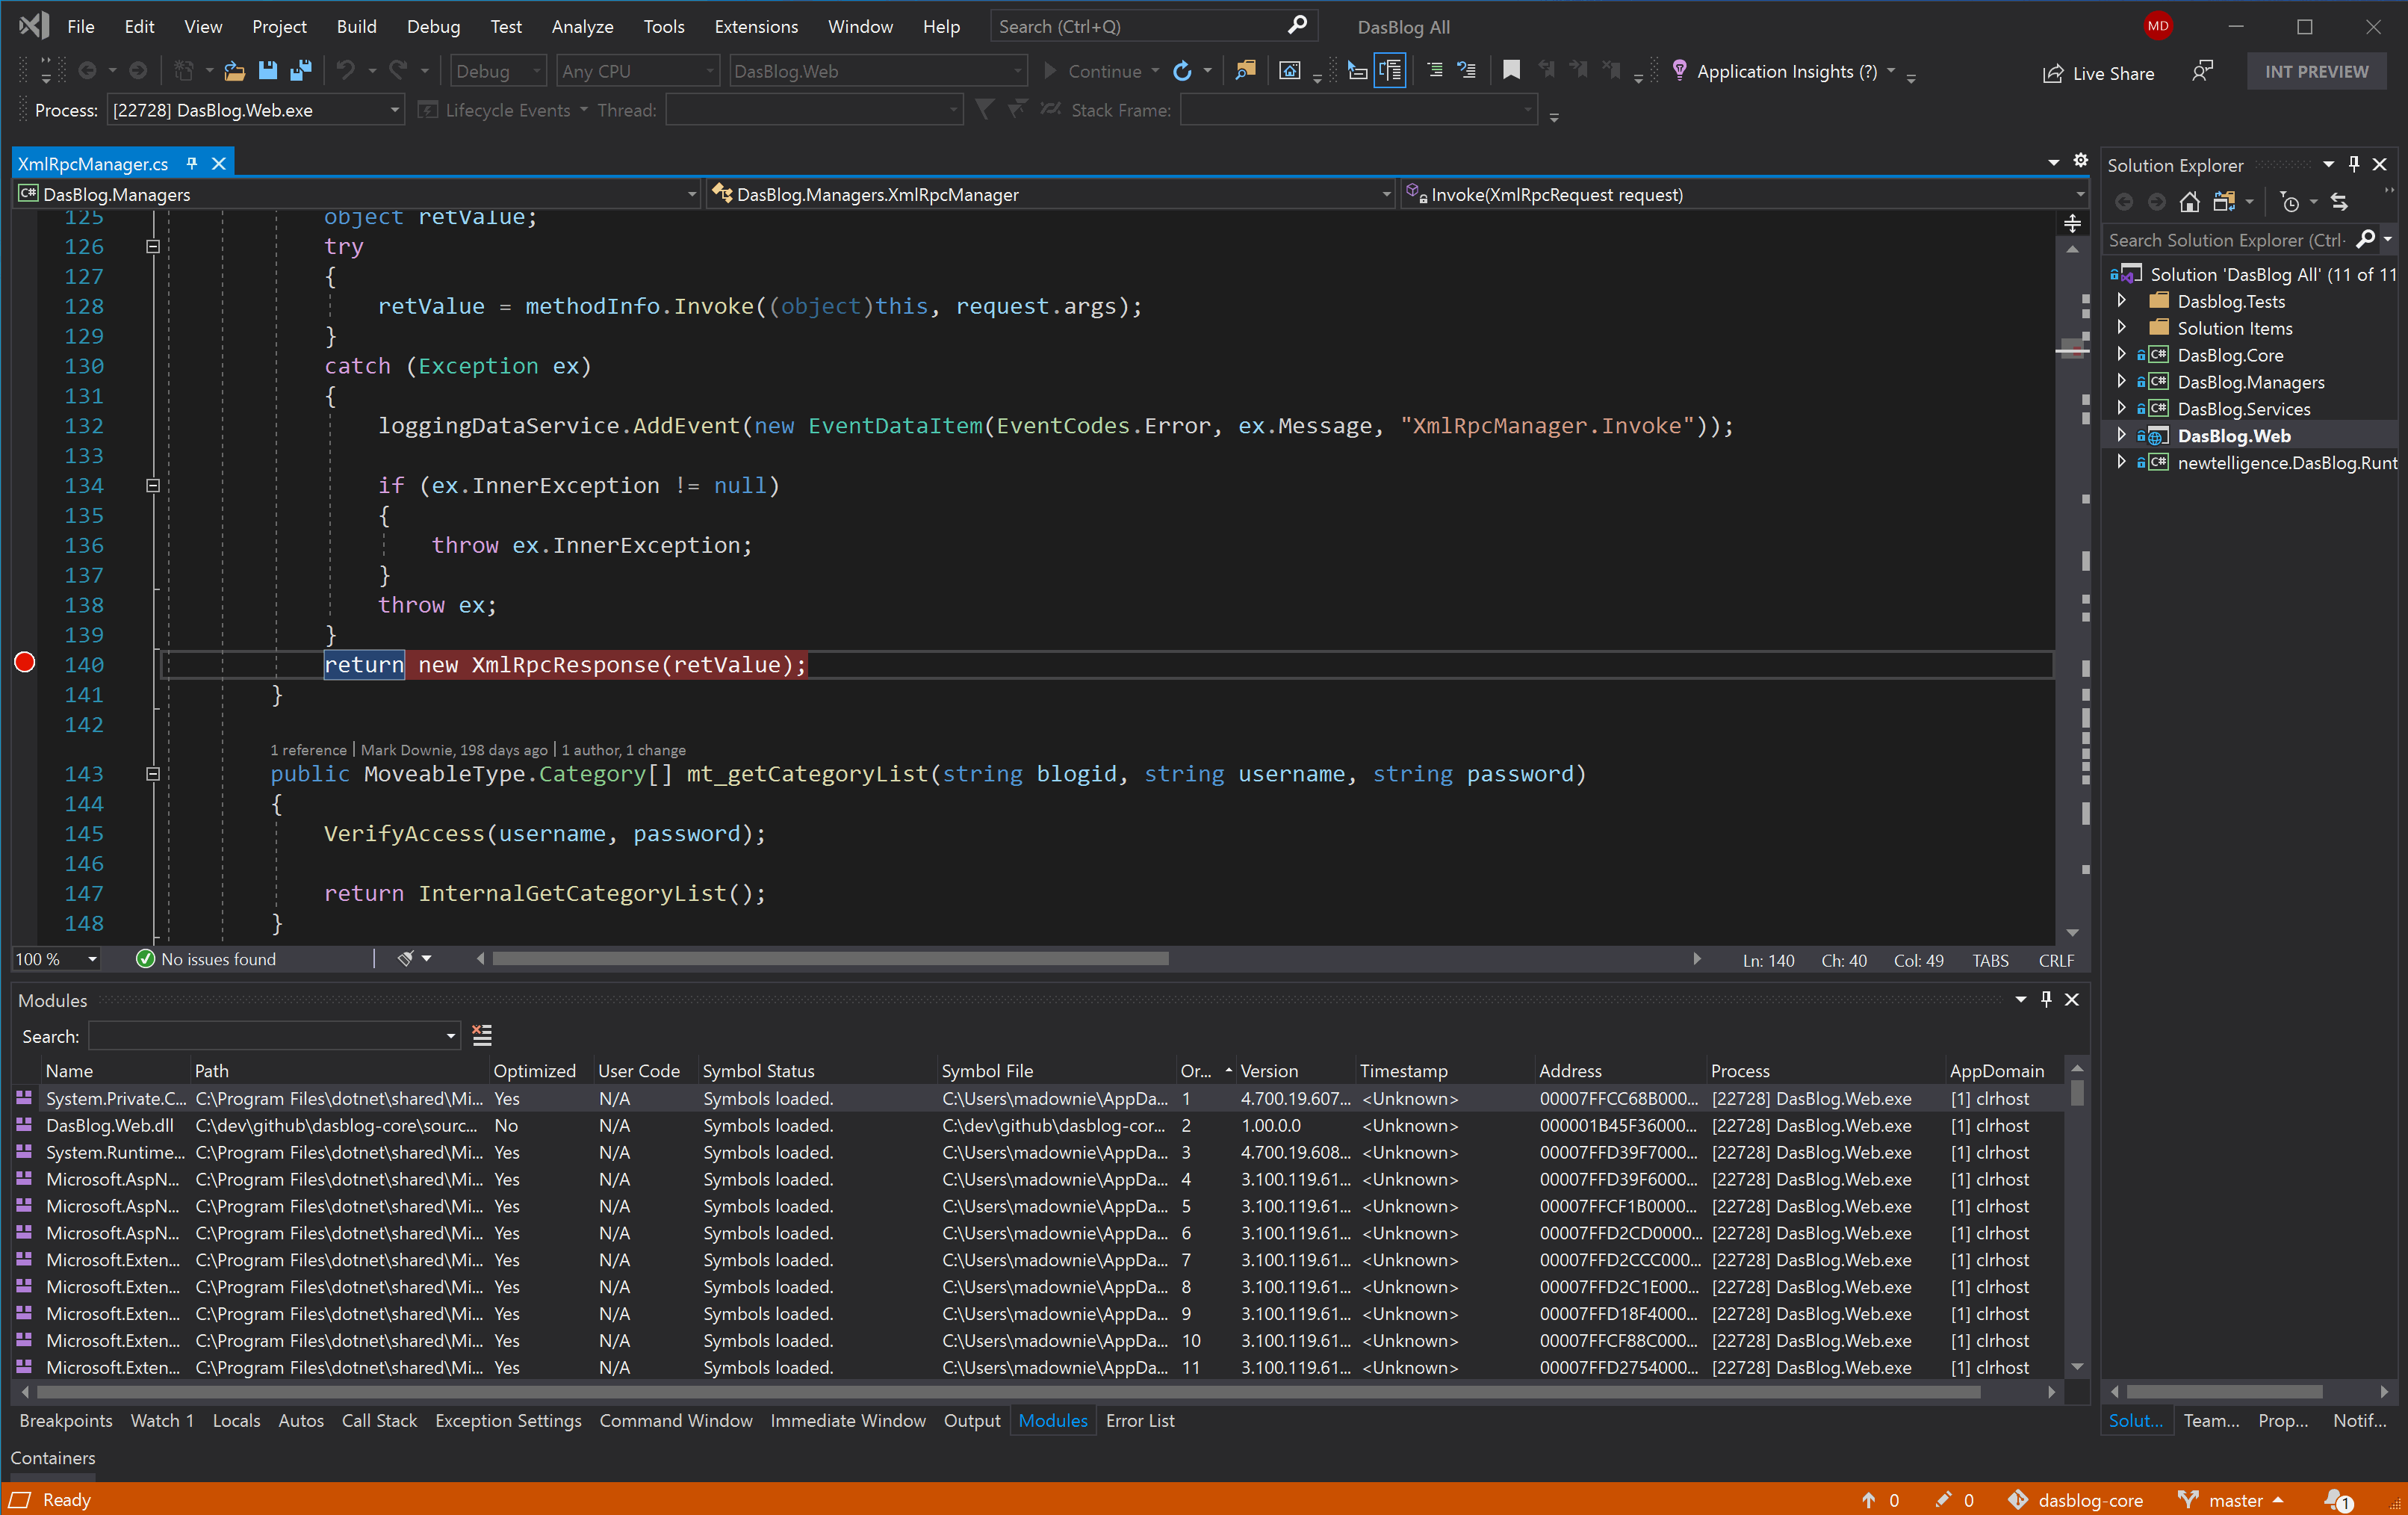 Shows decompilation and source extraction from Visual Studio Module window